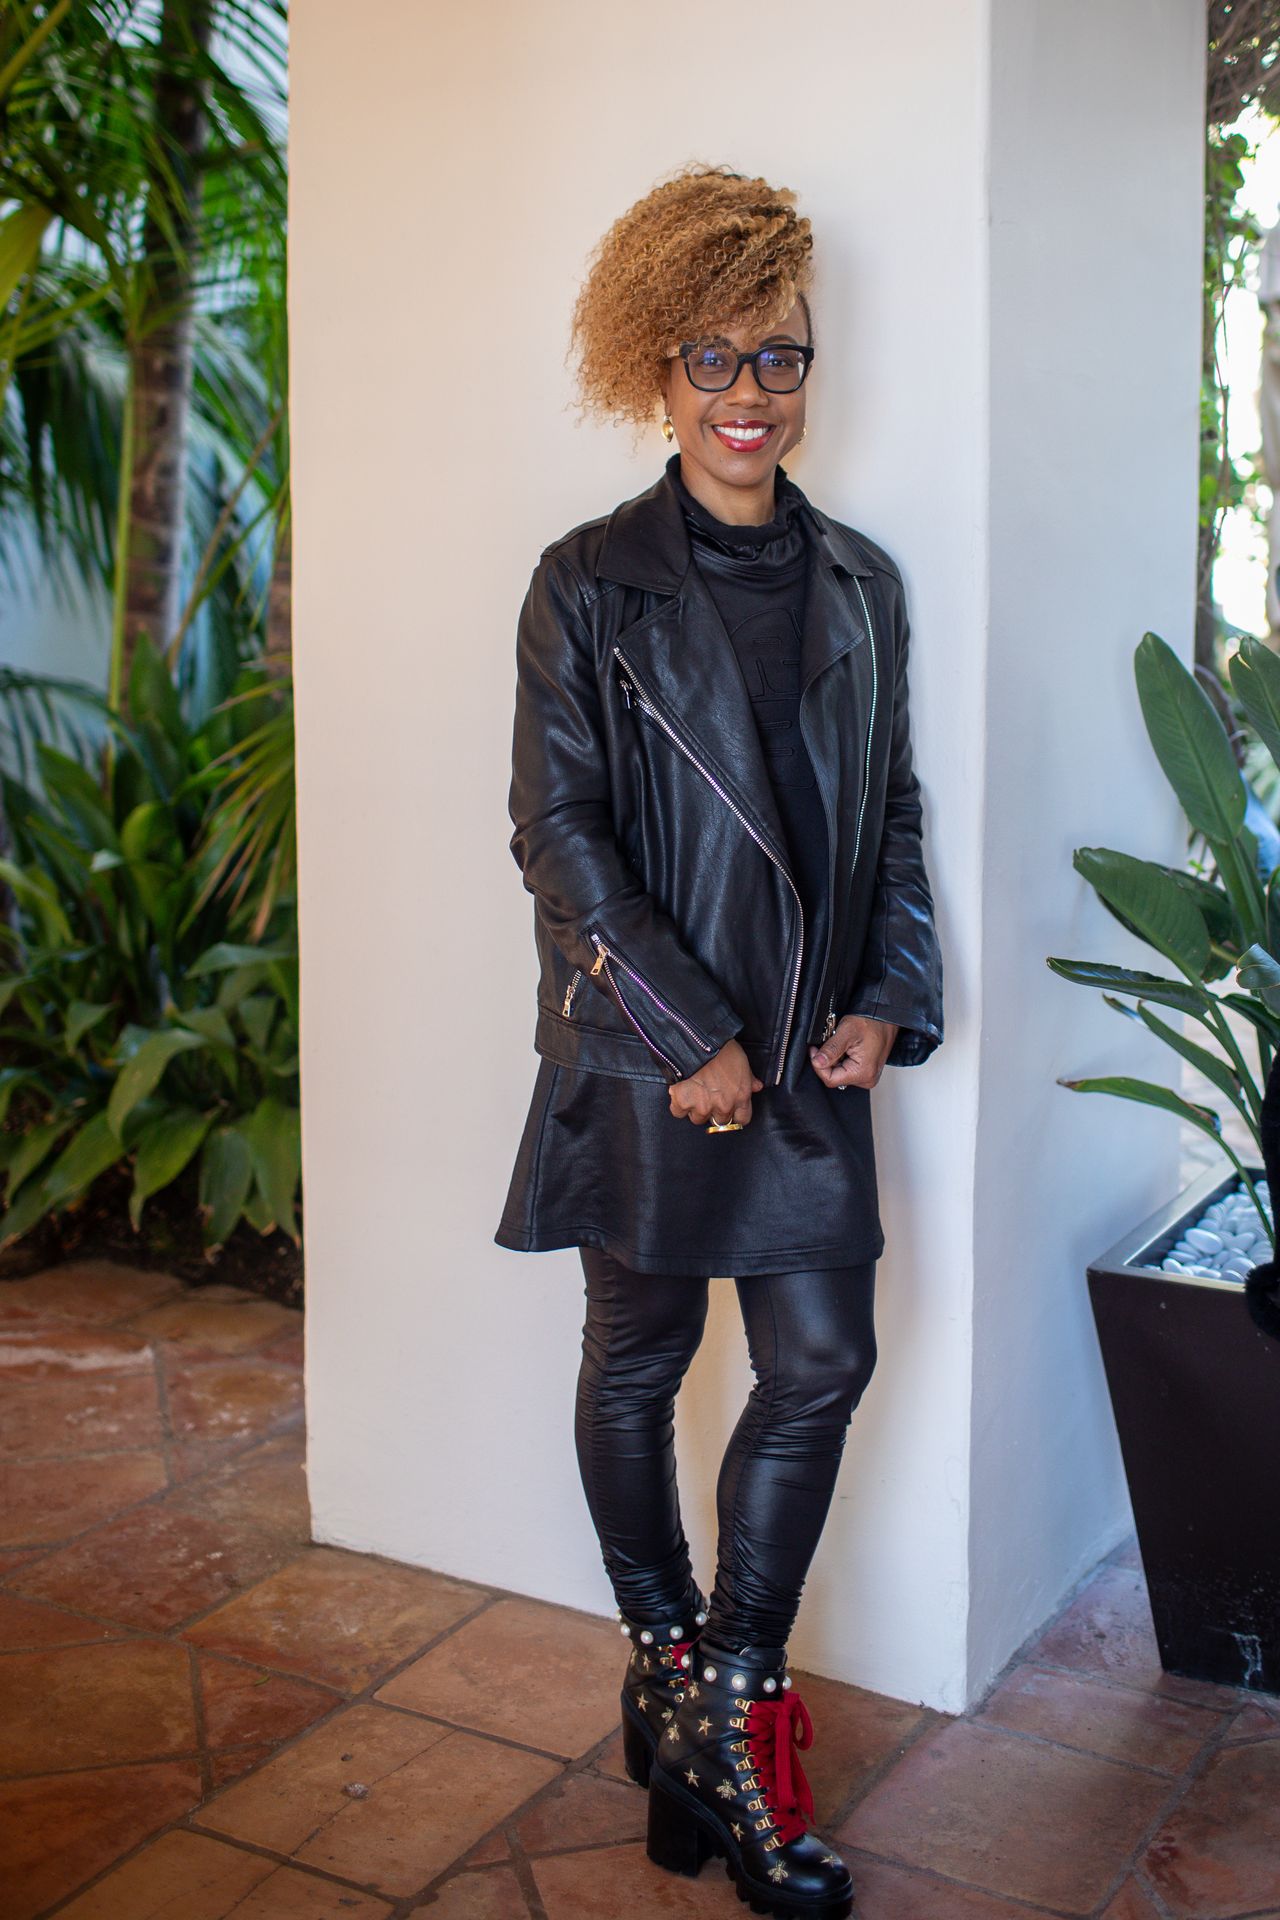 This is Latraviette Smith-Wilson's fourth year at the conference. She's wearing Gucci boots and a leather jacket by Mess in a Bottle. ”I’m a mood dresser," she said. "Literally how I feel when I wake up is how I will show up that day. Generally, I love the unexpected.”